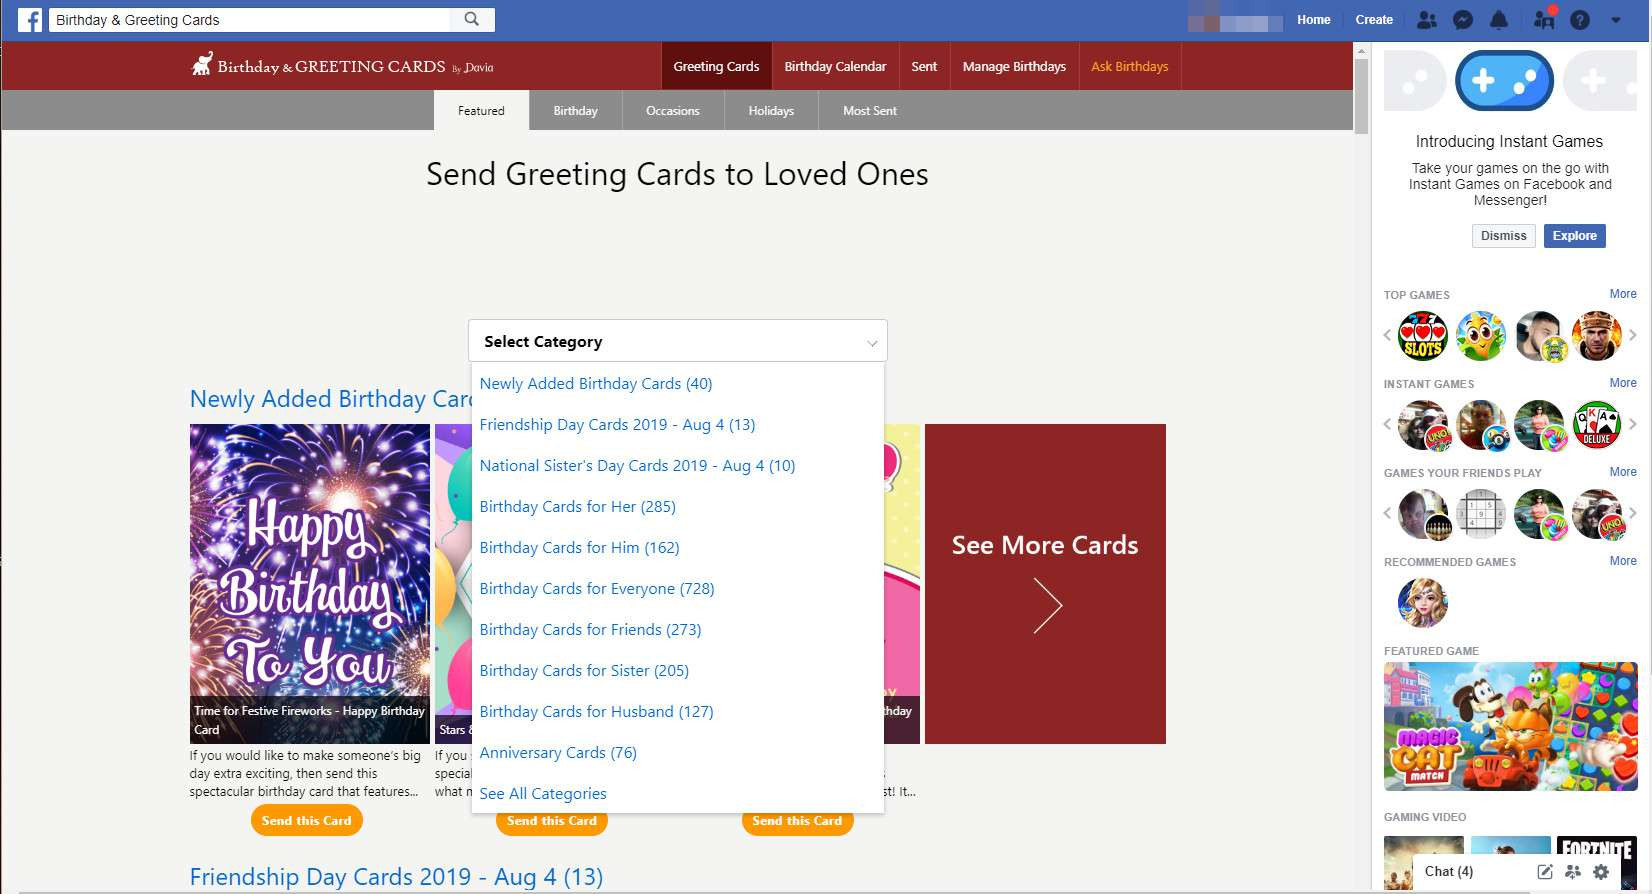 How To Send Birthday Card On Facebook
 How to Send Birthday Cards on